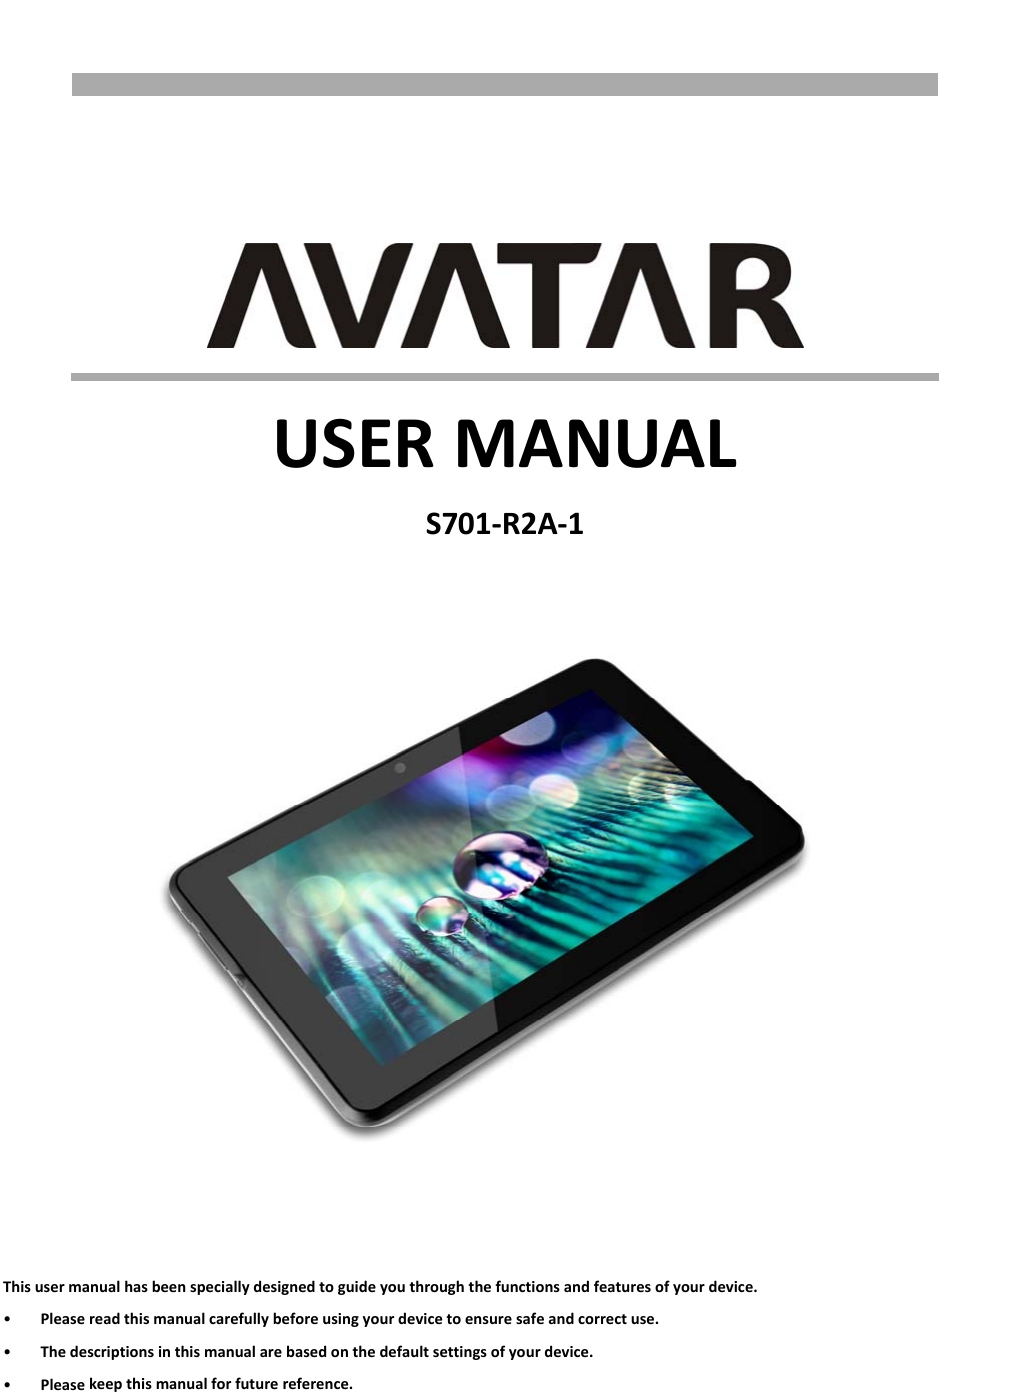 USERMANUALS701‐R2A‐1 Thisusermanualhasbeenspeciallydesignedtoguideyouthroughthefunctionsandfeaturesofyourdevice.• Pleasereadthismanualcarefullybeforeusingyourdevicetoensuresafeandcorrectuse.• Thedescriptionsinthismanualarebasedonthedefaultsettingsofyourdevice.• Pleasekeepthismanualforfuturereference.